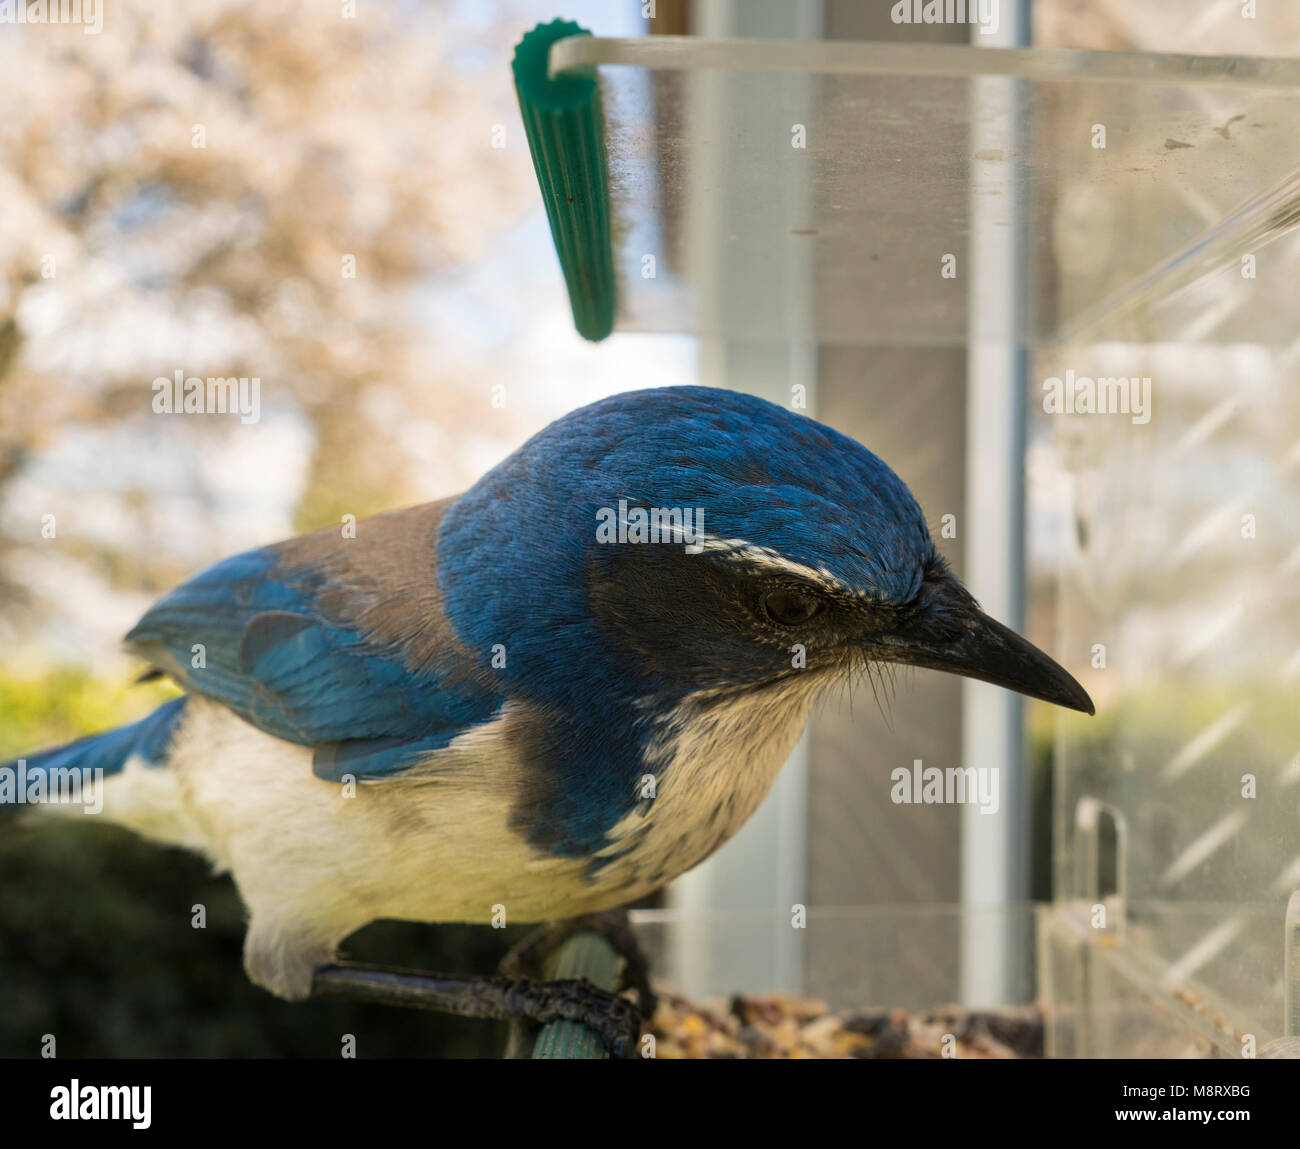 A large bird known as the California Scrub Jay takes over a feeder and grabs some seed Stock Photo